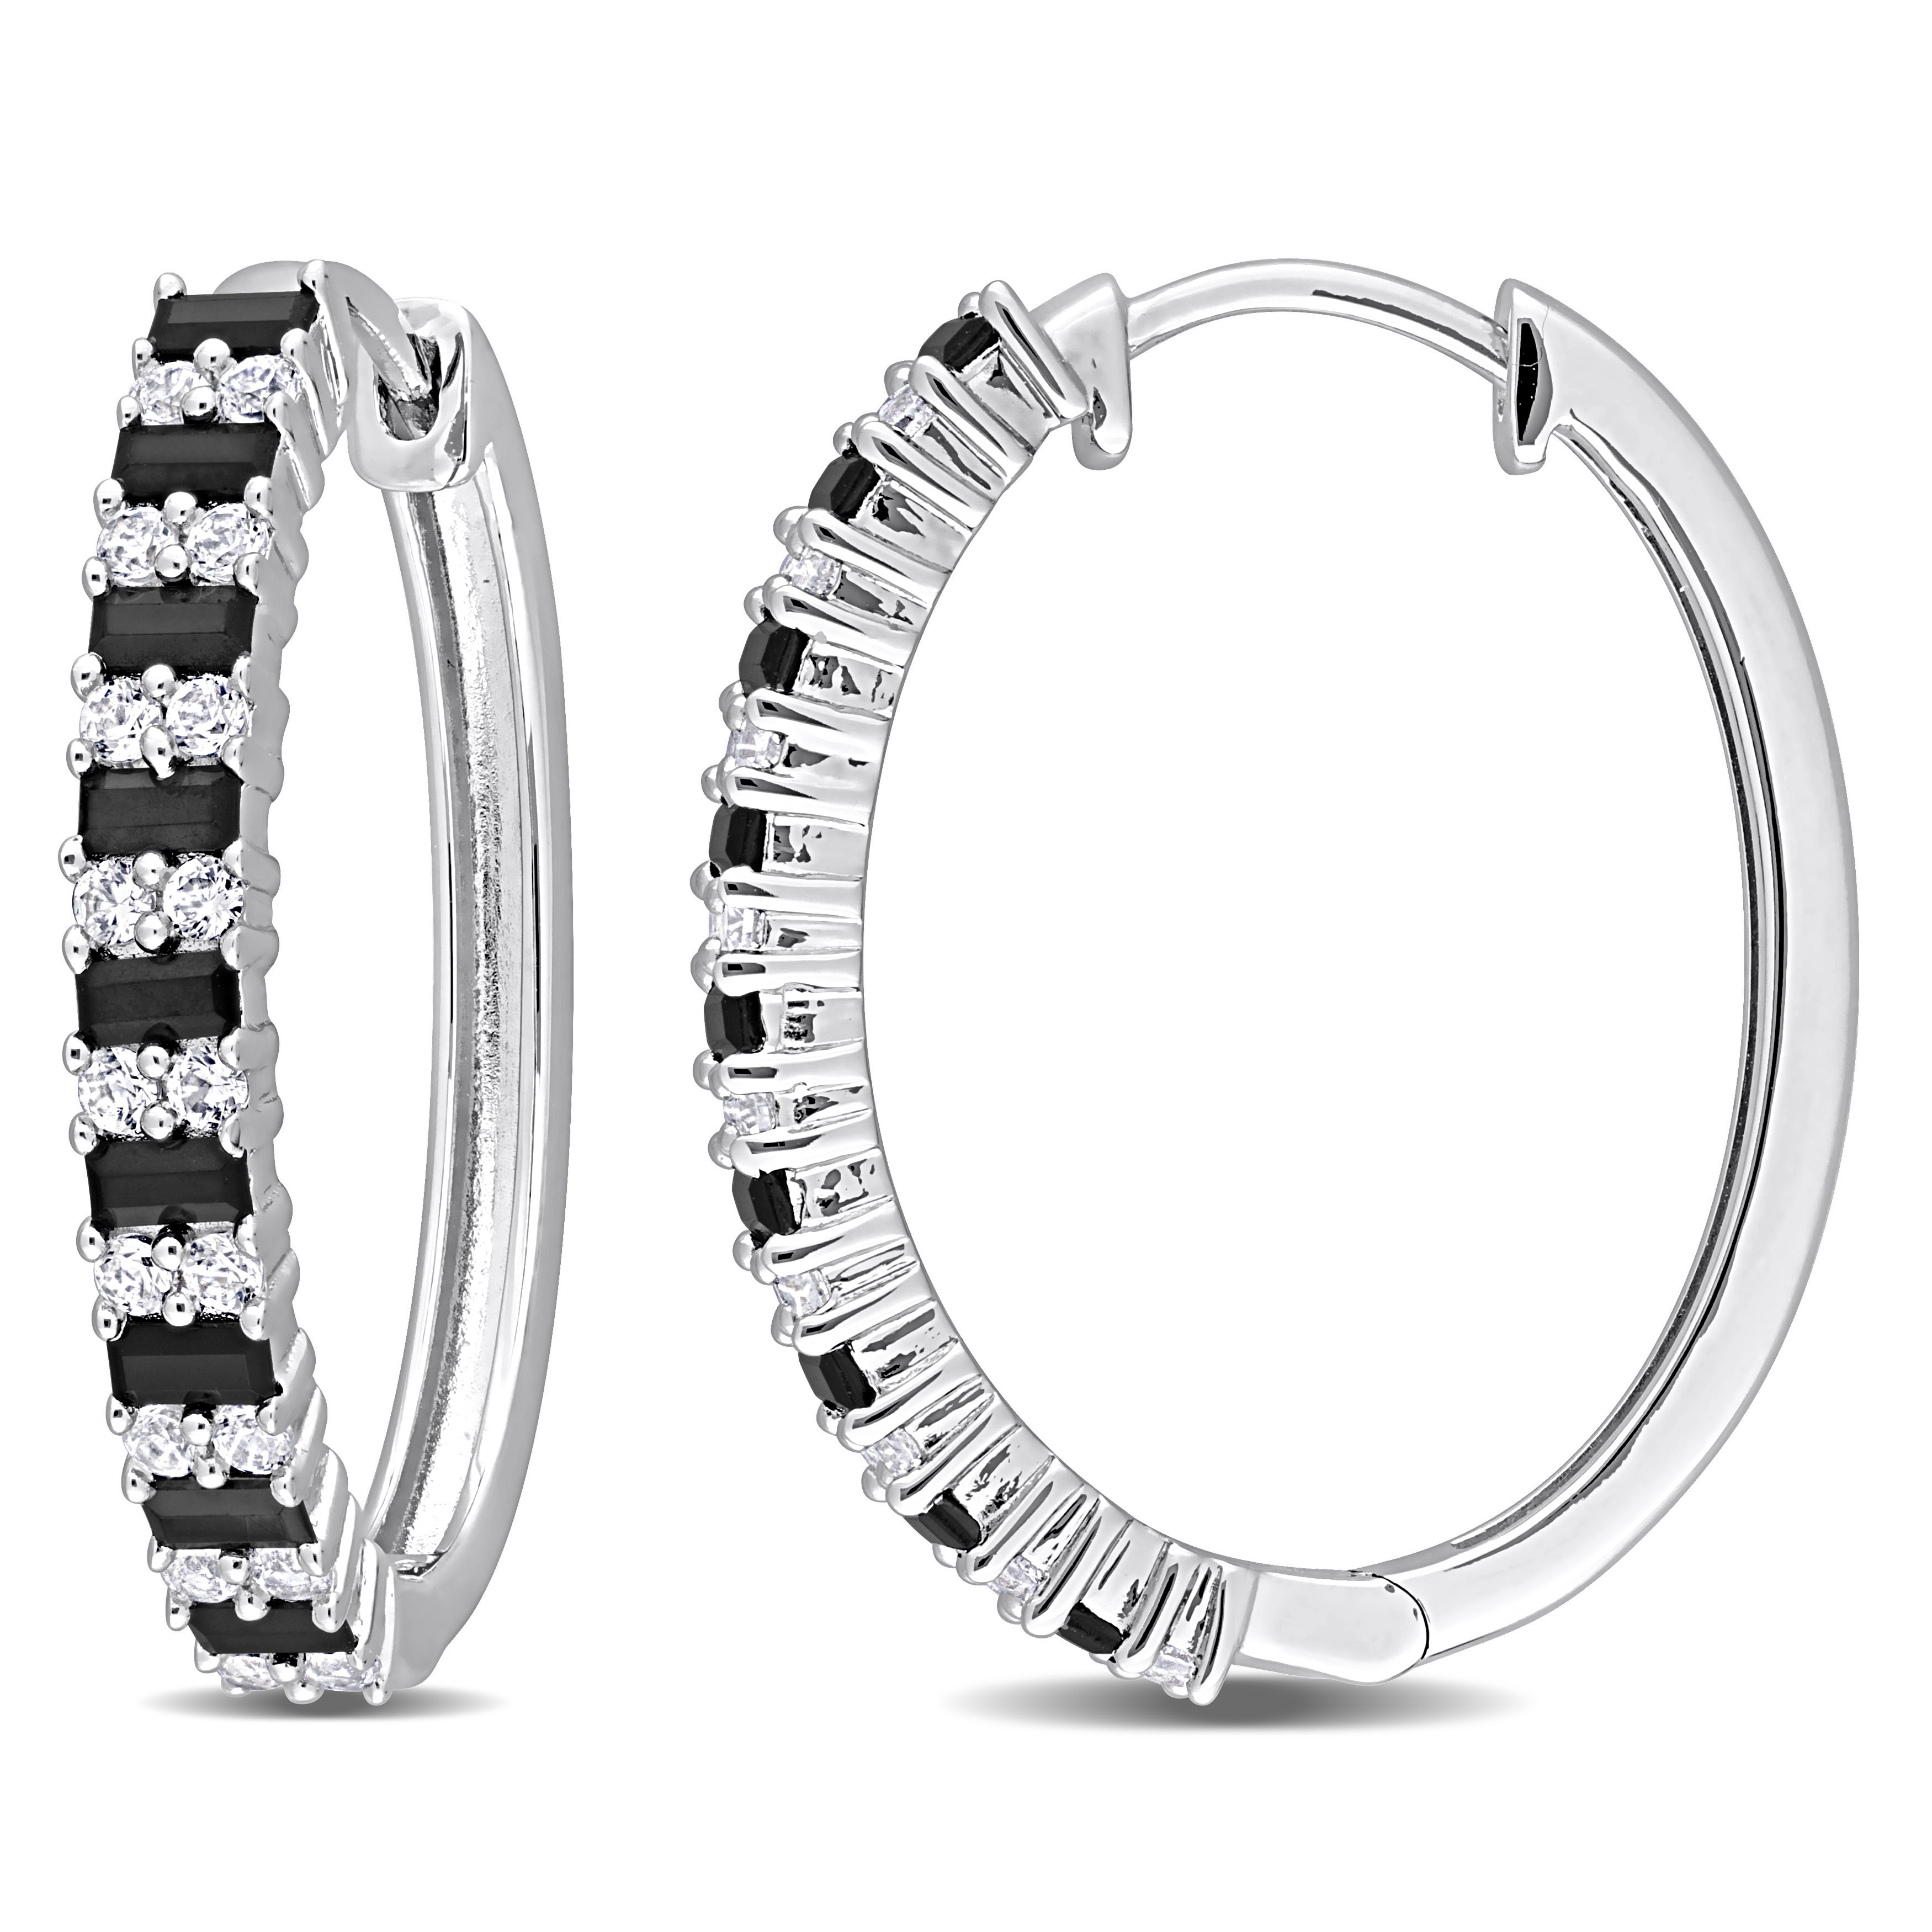 2 1/2 CT TGW Black Spinel and Created White Sapphire Hoop Earrings in Sterling Silver